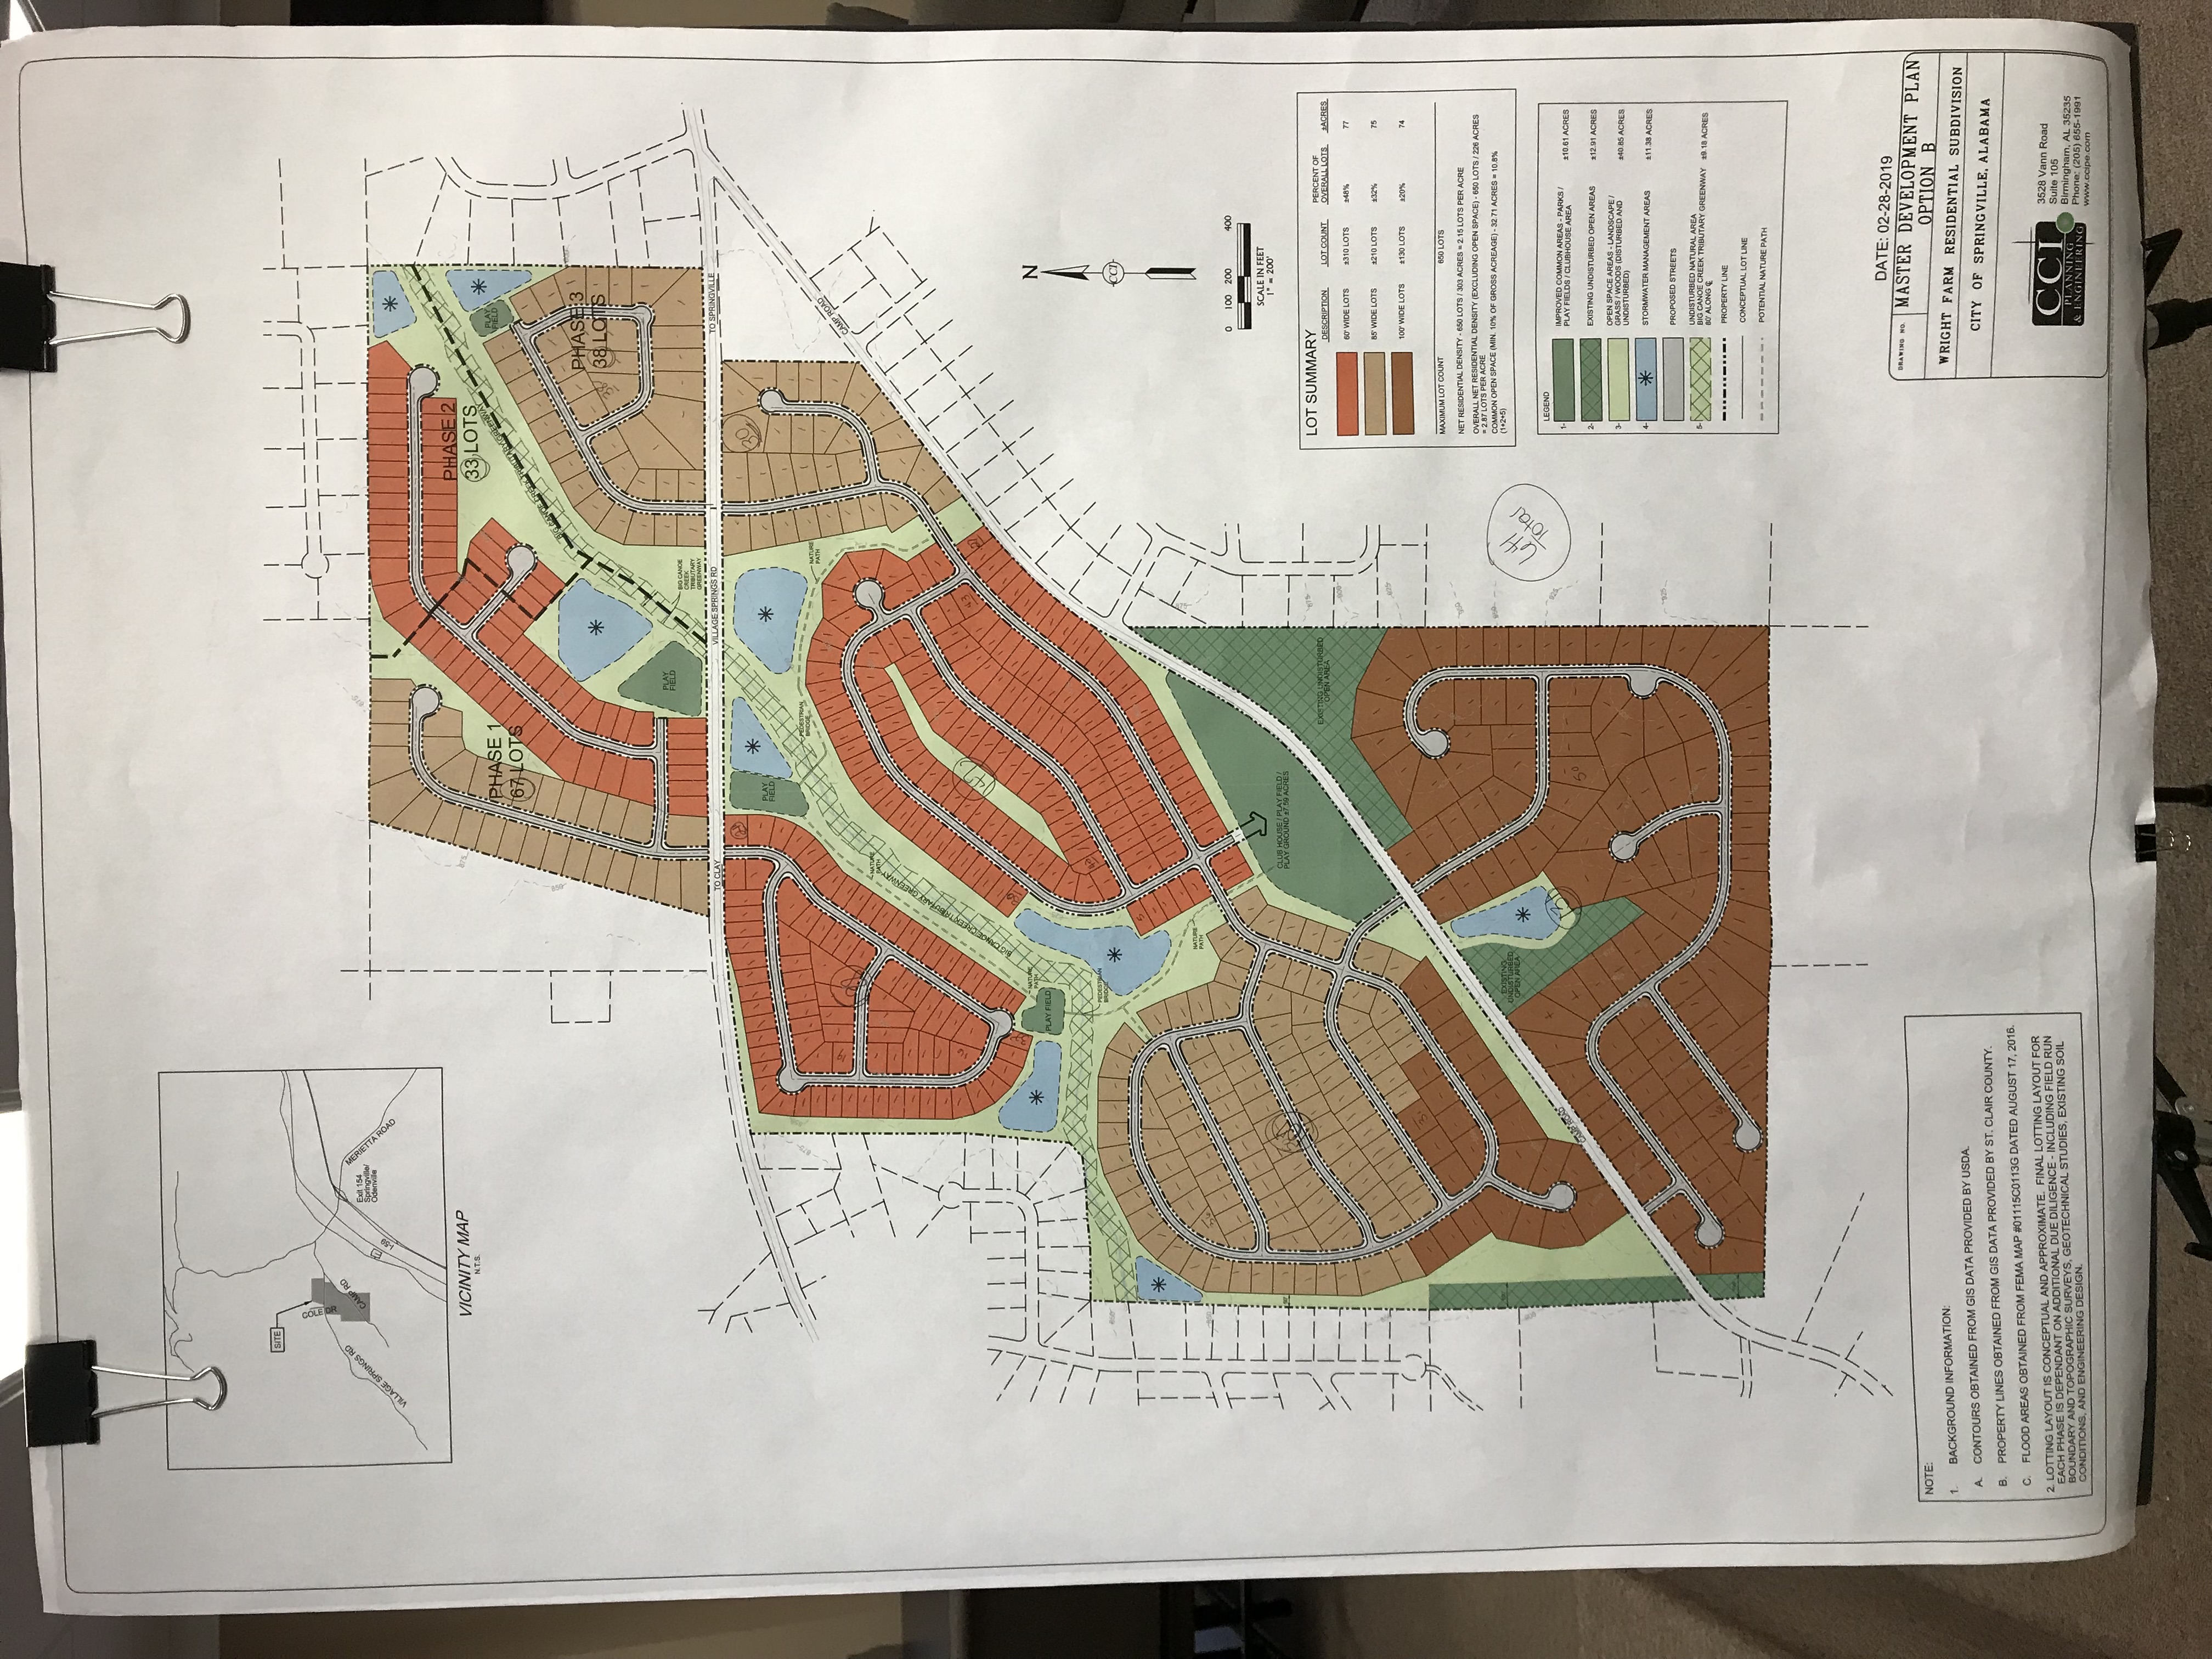 FACT CHECK: Odenville Utilities to take over sewer for new development on Wright Farm in Springville